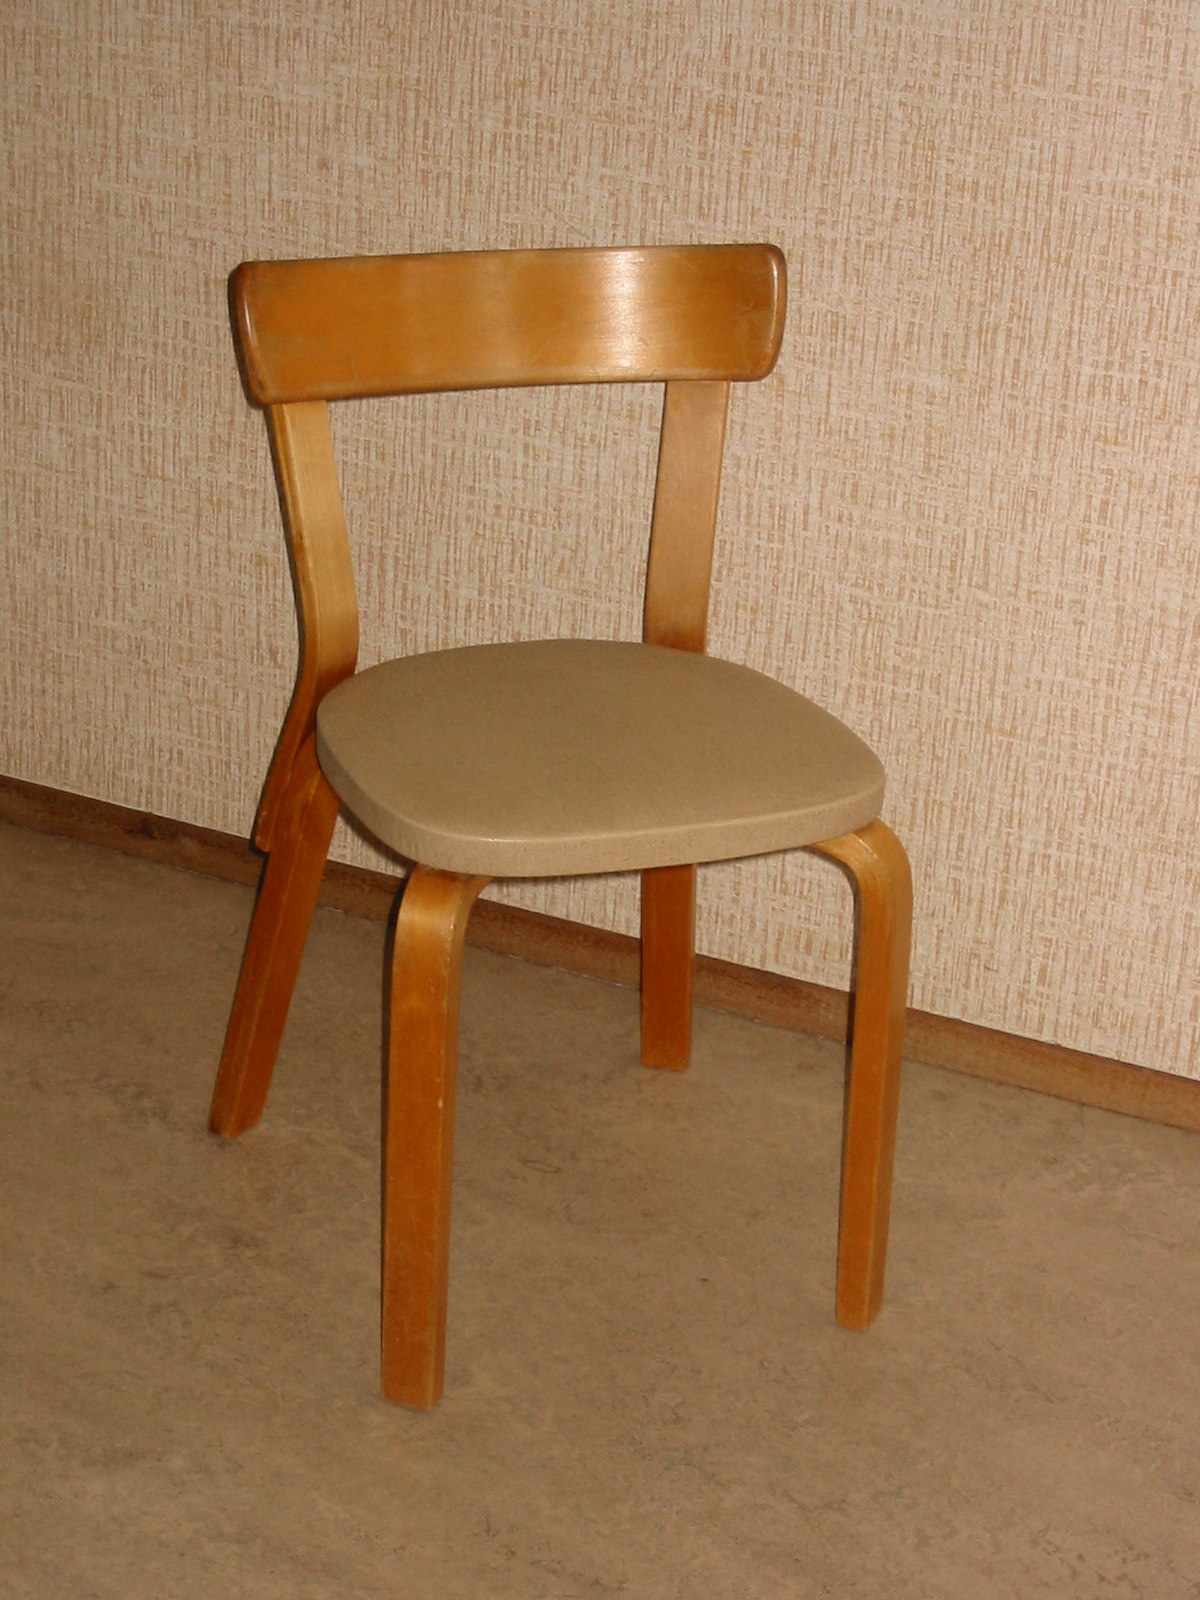 Chair Simple English Wikipedia the free encyclopedia